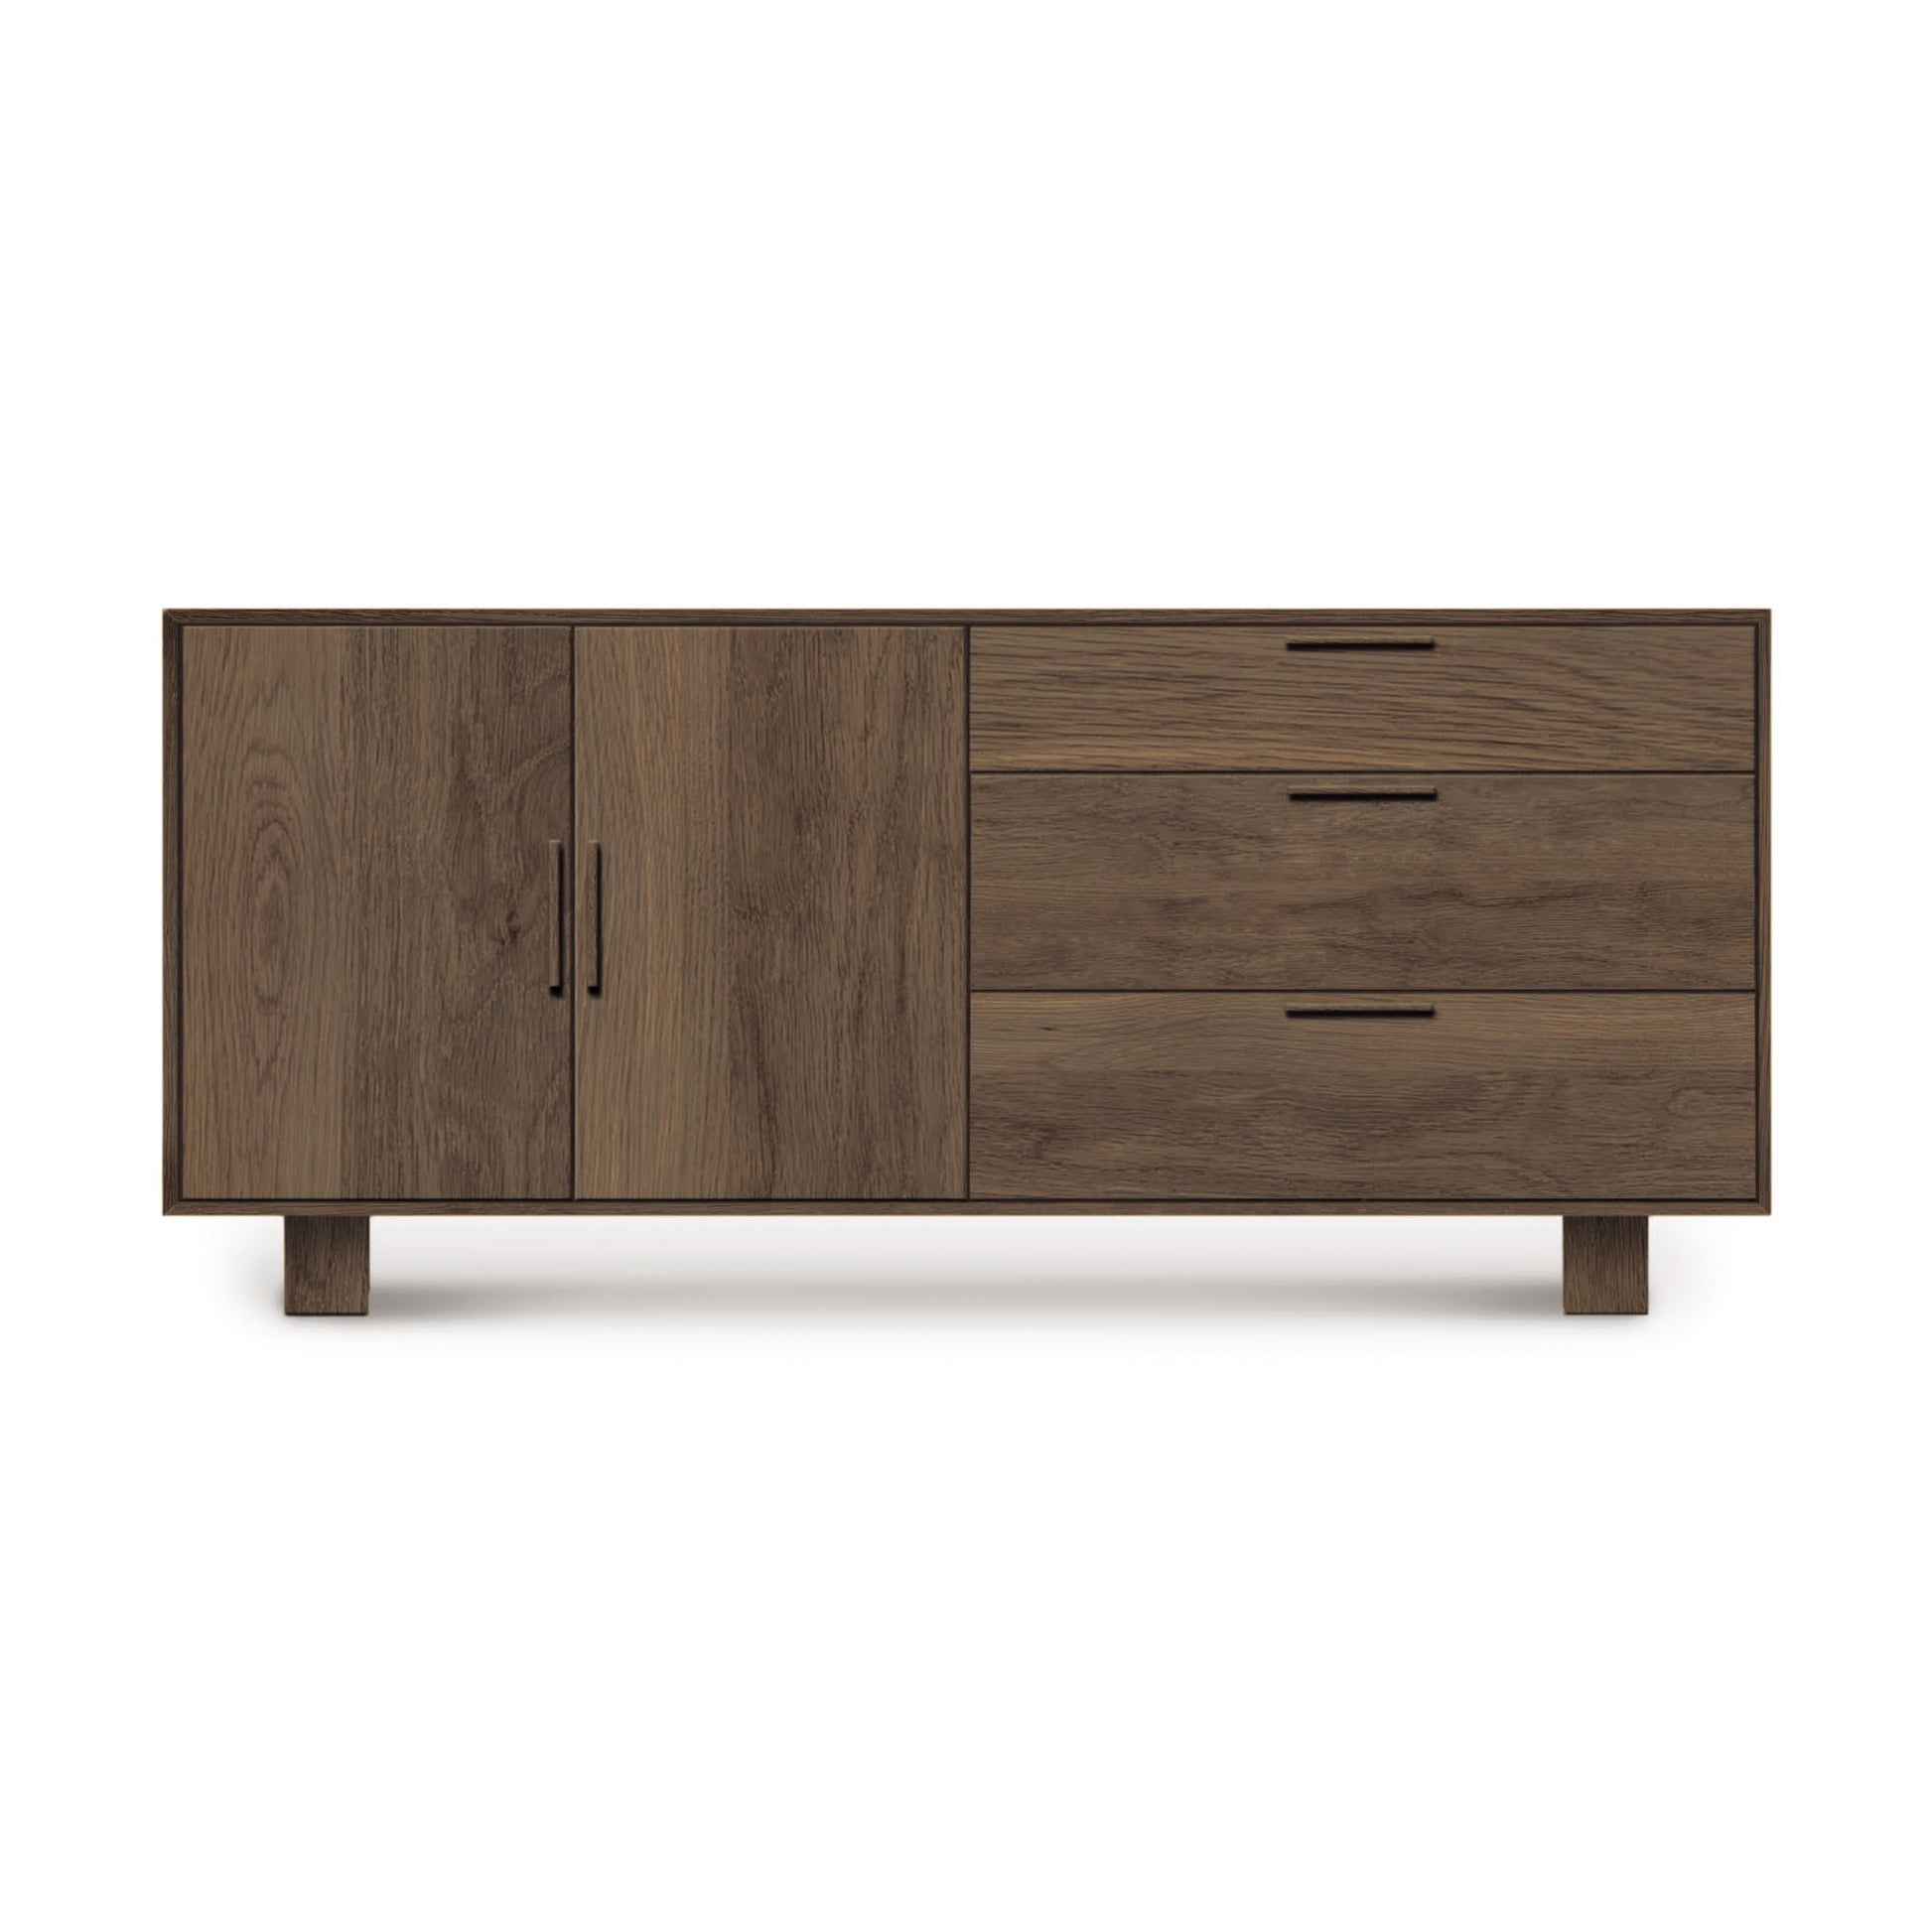 A modern Copeland Furniture Iso 2 Door, 3 Side Drawer Buffet, set against a plain white background.